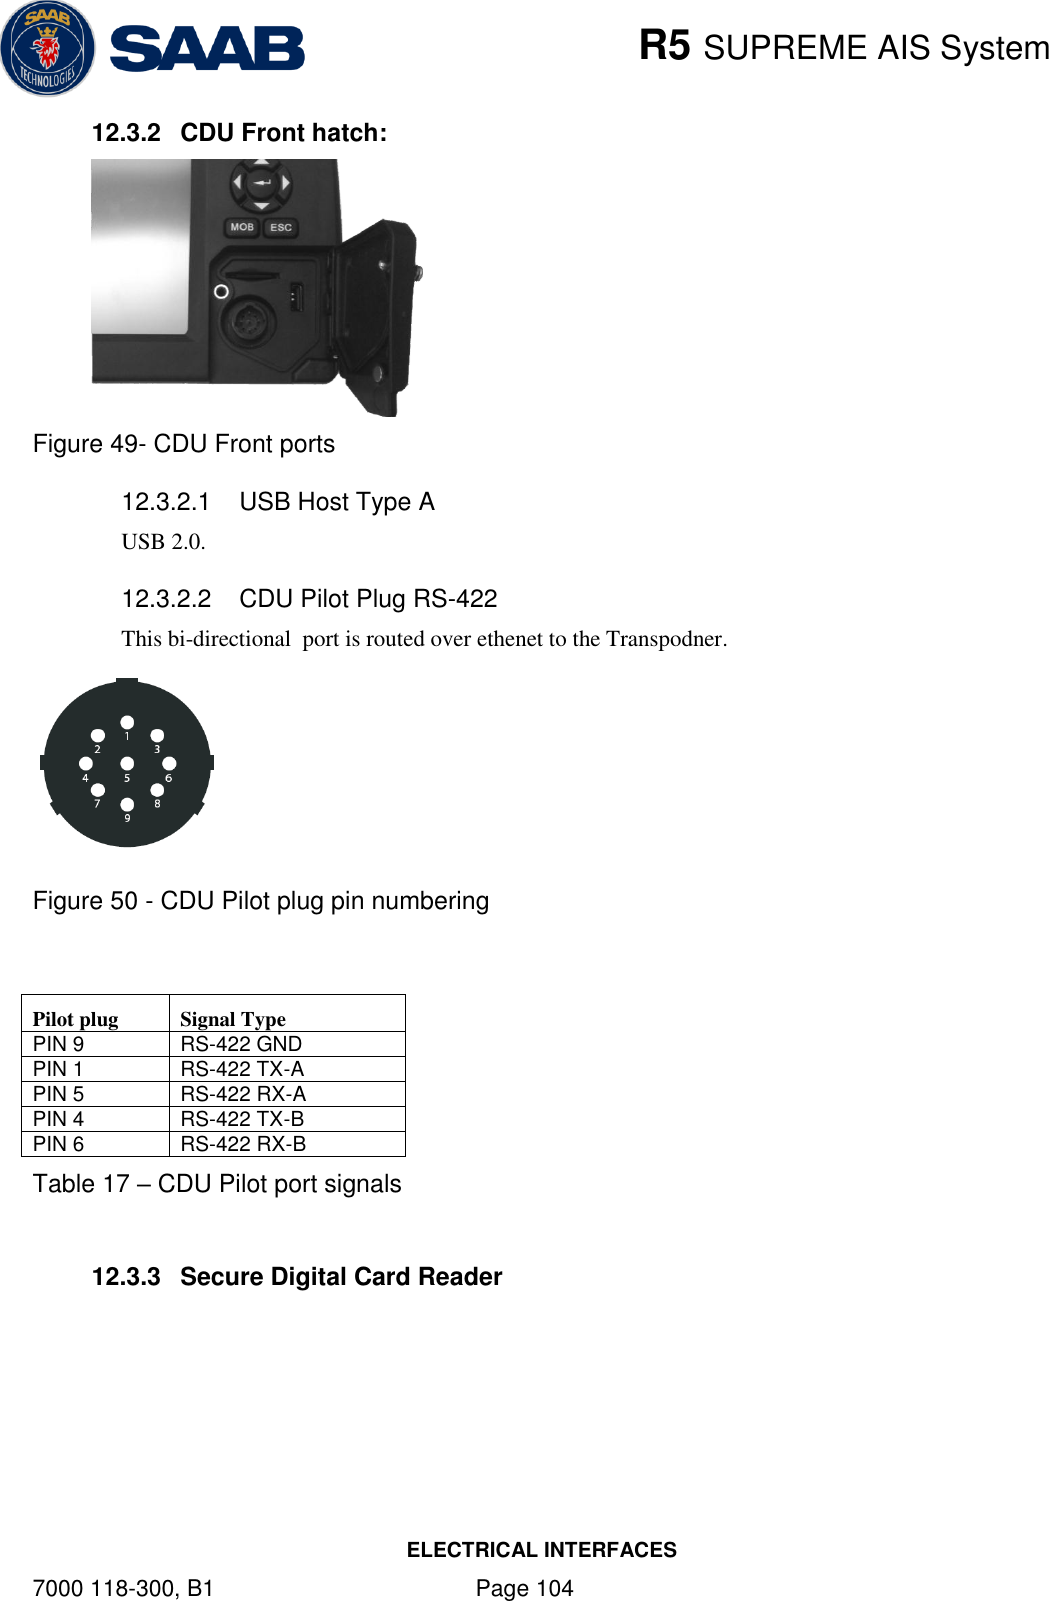    R5 SUPREME AIS System ELECTRICAL INTERFACES 7000 118-300, B1    Page 104 12.3.2  CDU Front hatch:  Figure 49- CDU Front ports 12.3.2.1  USB Host Type A USB 2.0.  12.3.2.2  CDU Pilot Plug RS-422 This bi-directional  port is routed over ethenet to the Transpodner.  Figure 50 - CDU Pilot plug pin numbering  Pilot plug Signal Type PIN 9 RS-422 GND PIN 1 RS-422 TX-A PIN 5 RS-422 RX-A PIN 4 RS-422 TX-B PIN 6 RS-422 RX-B Table 17 – CDU Pilot port signals  12.3.3  Secure Digital Card Reader 